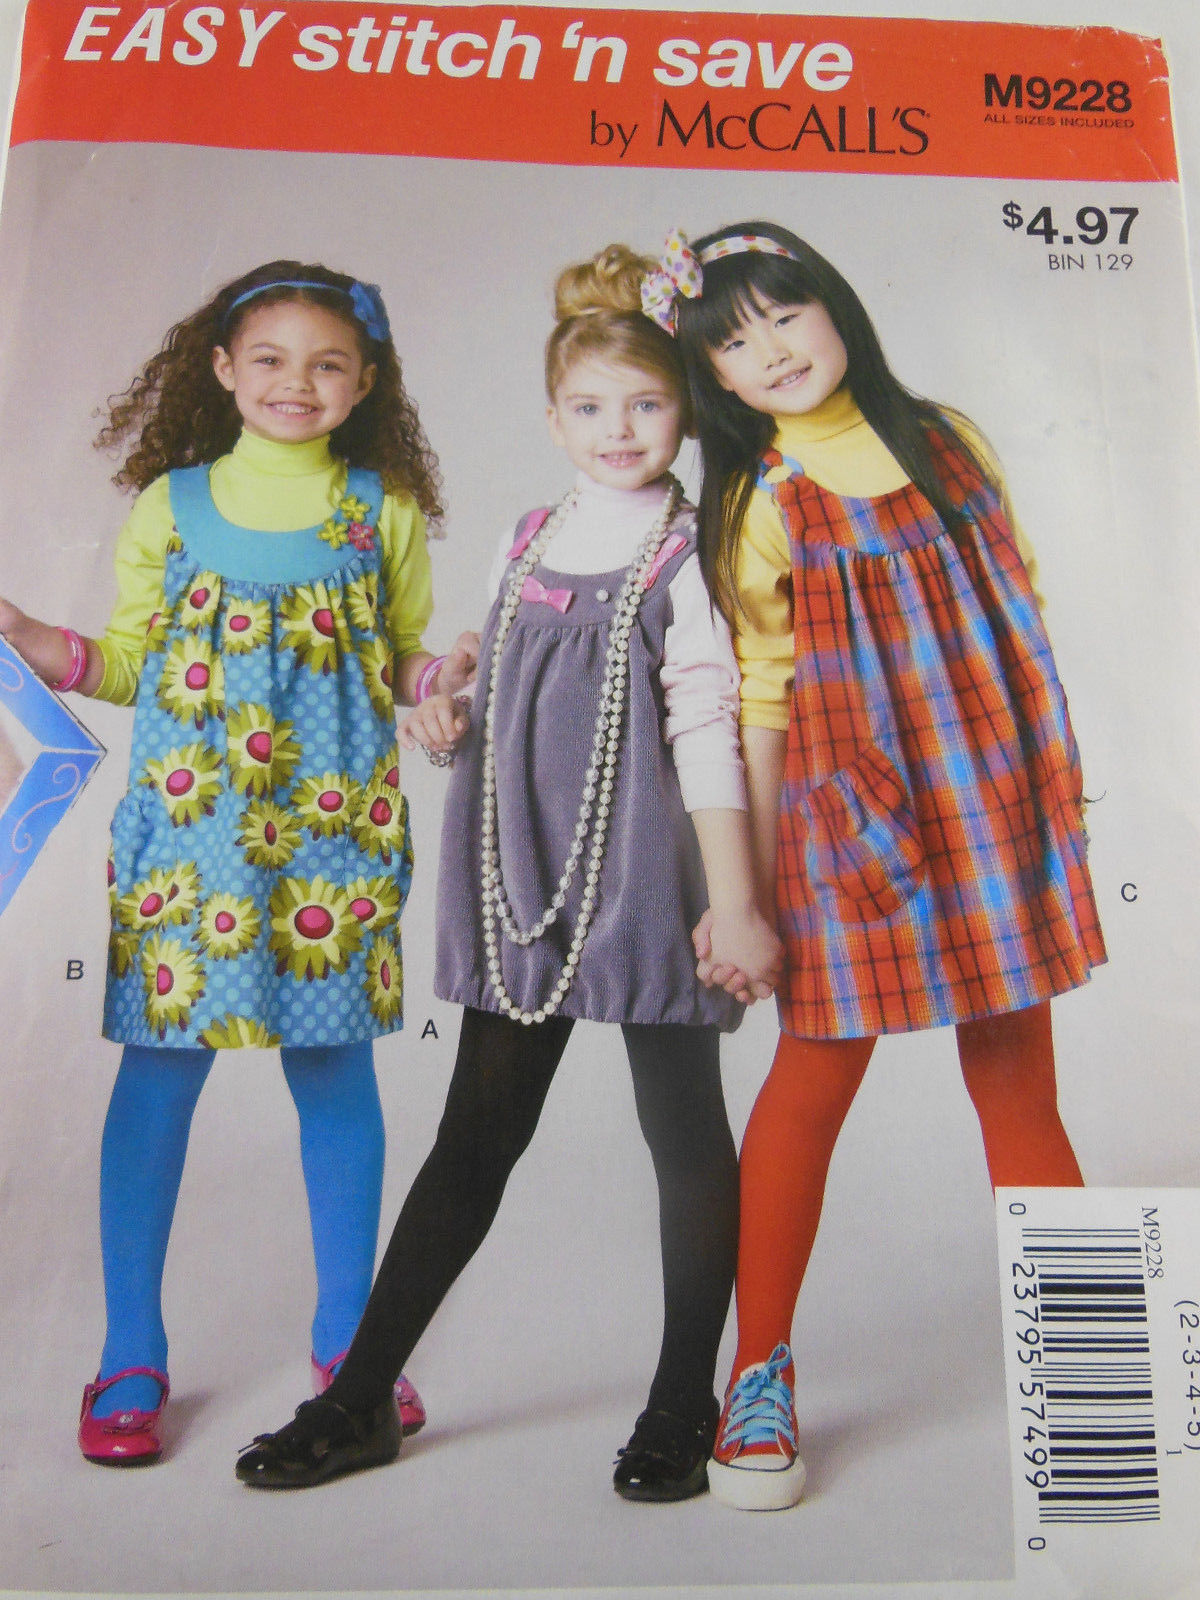 NEW McCall's Easy Stitch and Save Kid's Jumper Pattern M9228 Size 2 3 4 5 child - $2.76